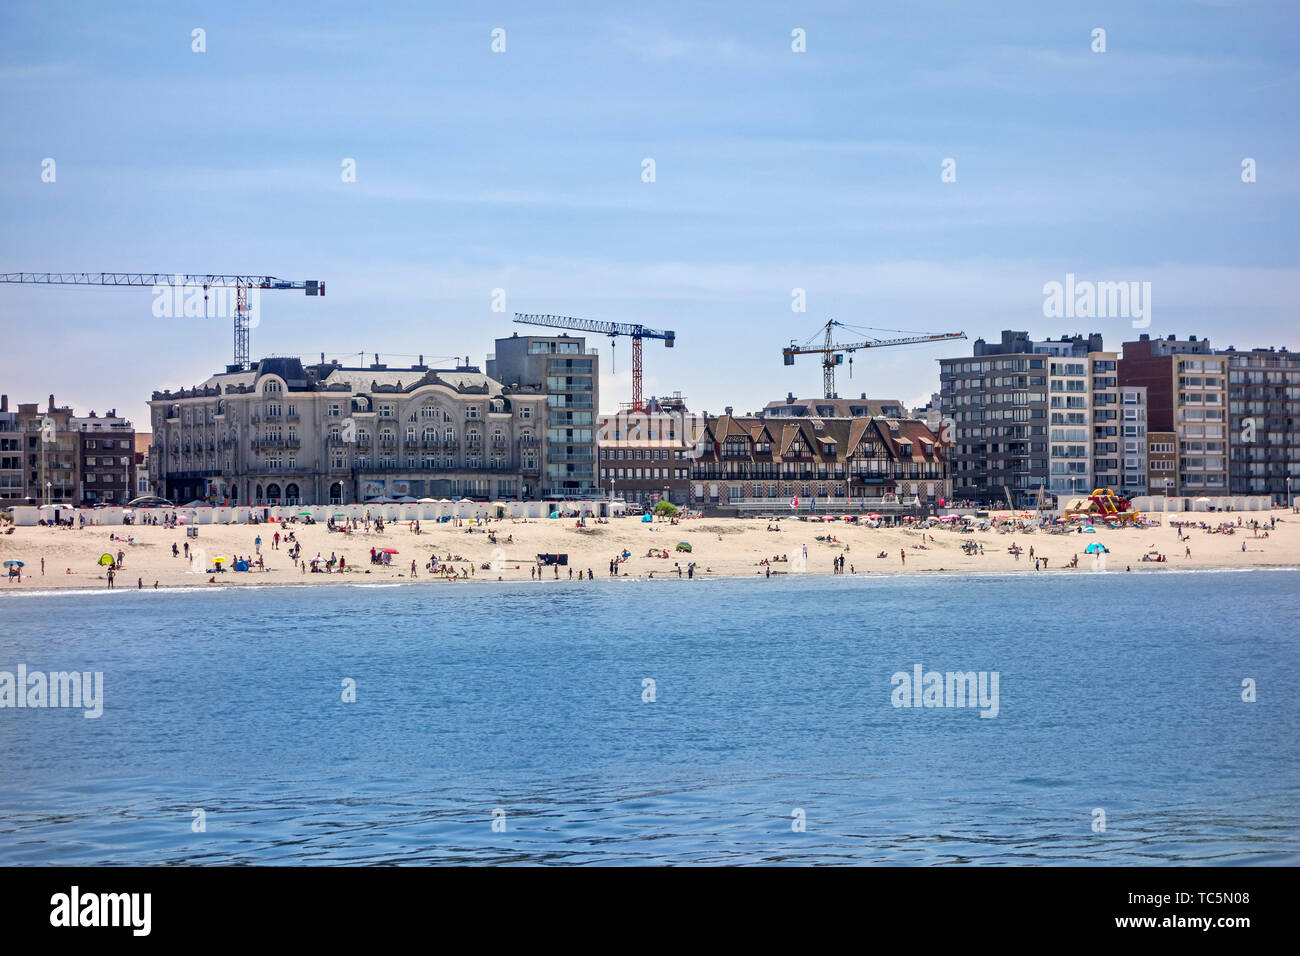 Tourists on the beach and flats and apartments being built at Nieuport / Nieuwpoort, seaside resort along the North Sea coast, West Flanders, Belgium Stock Photo